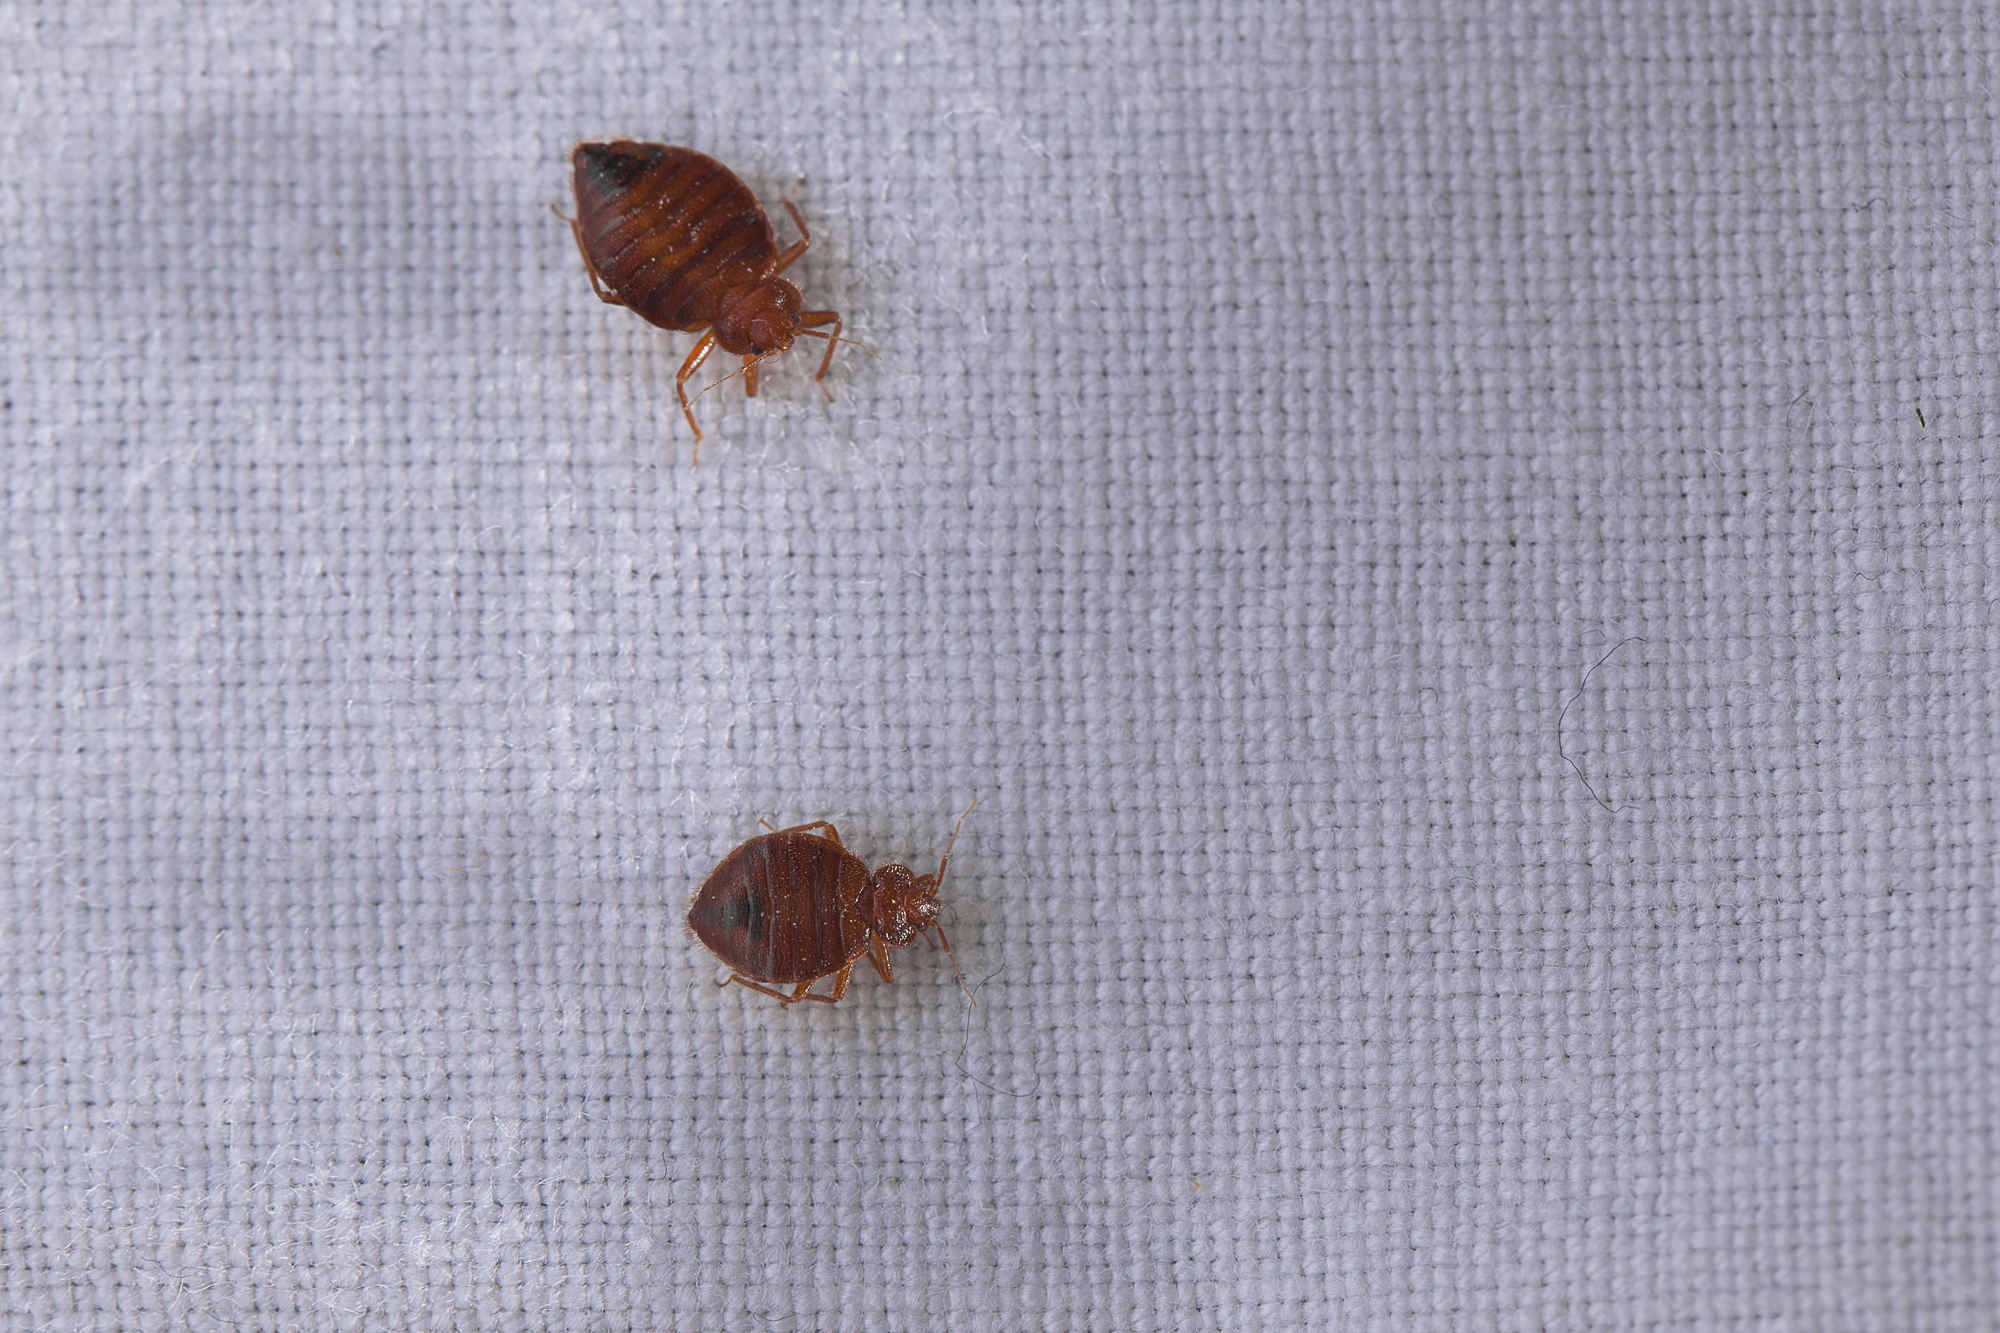 Bed Bugs On White Sheet